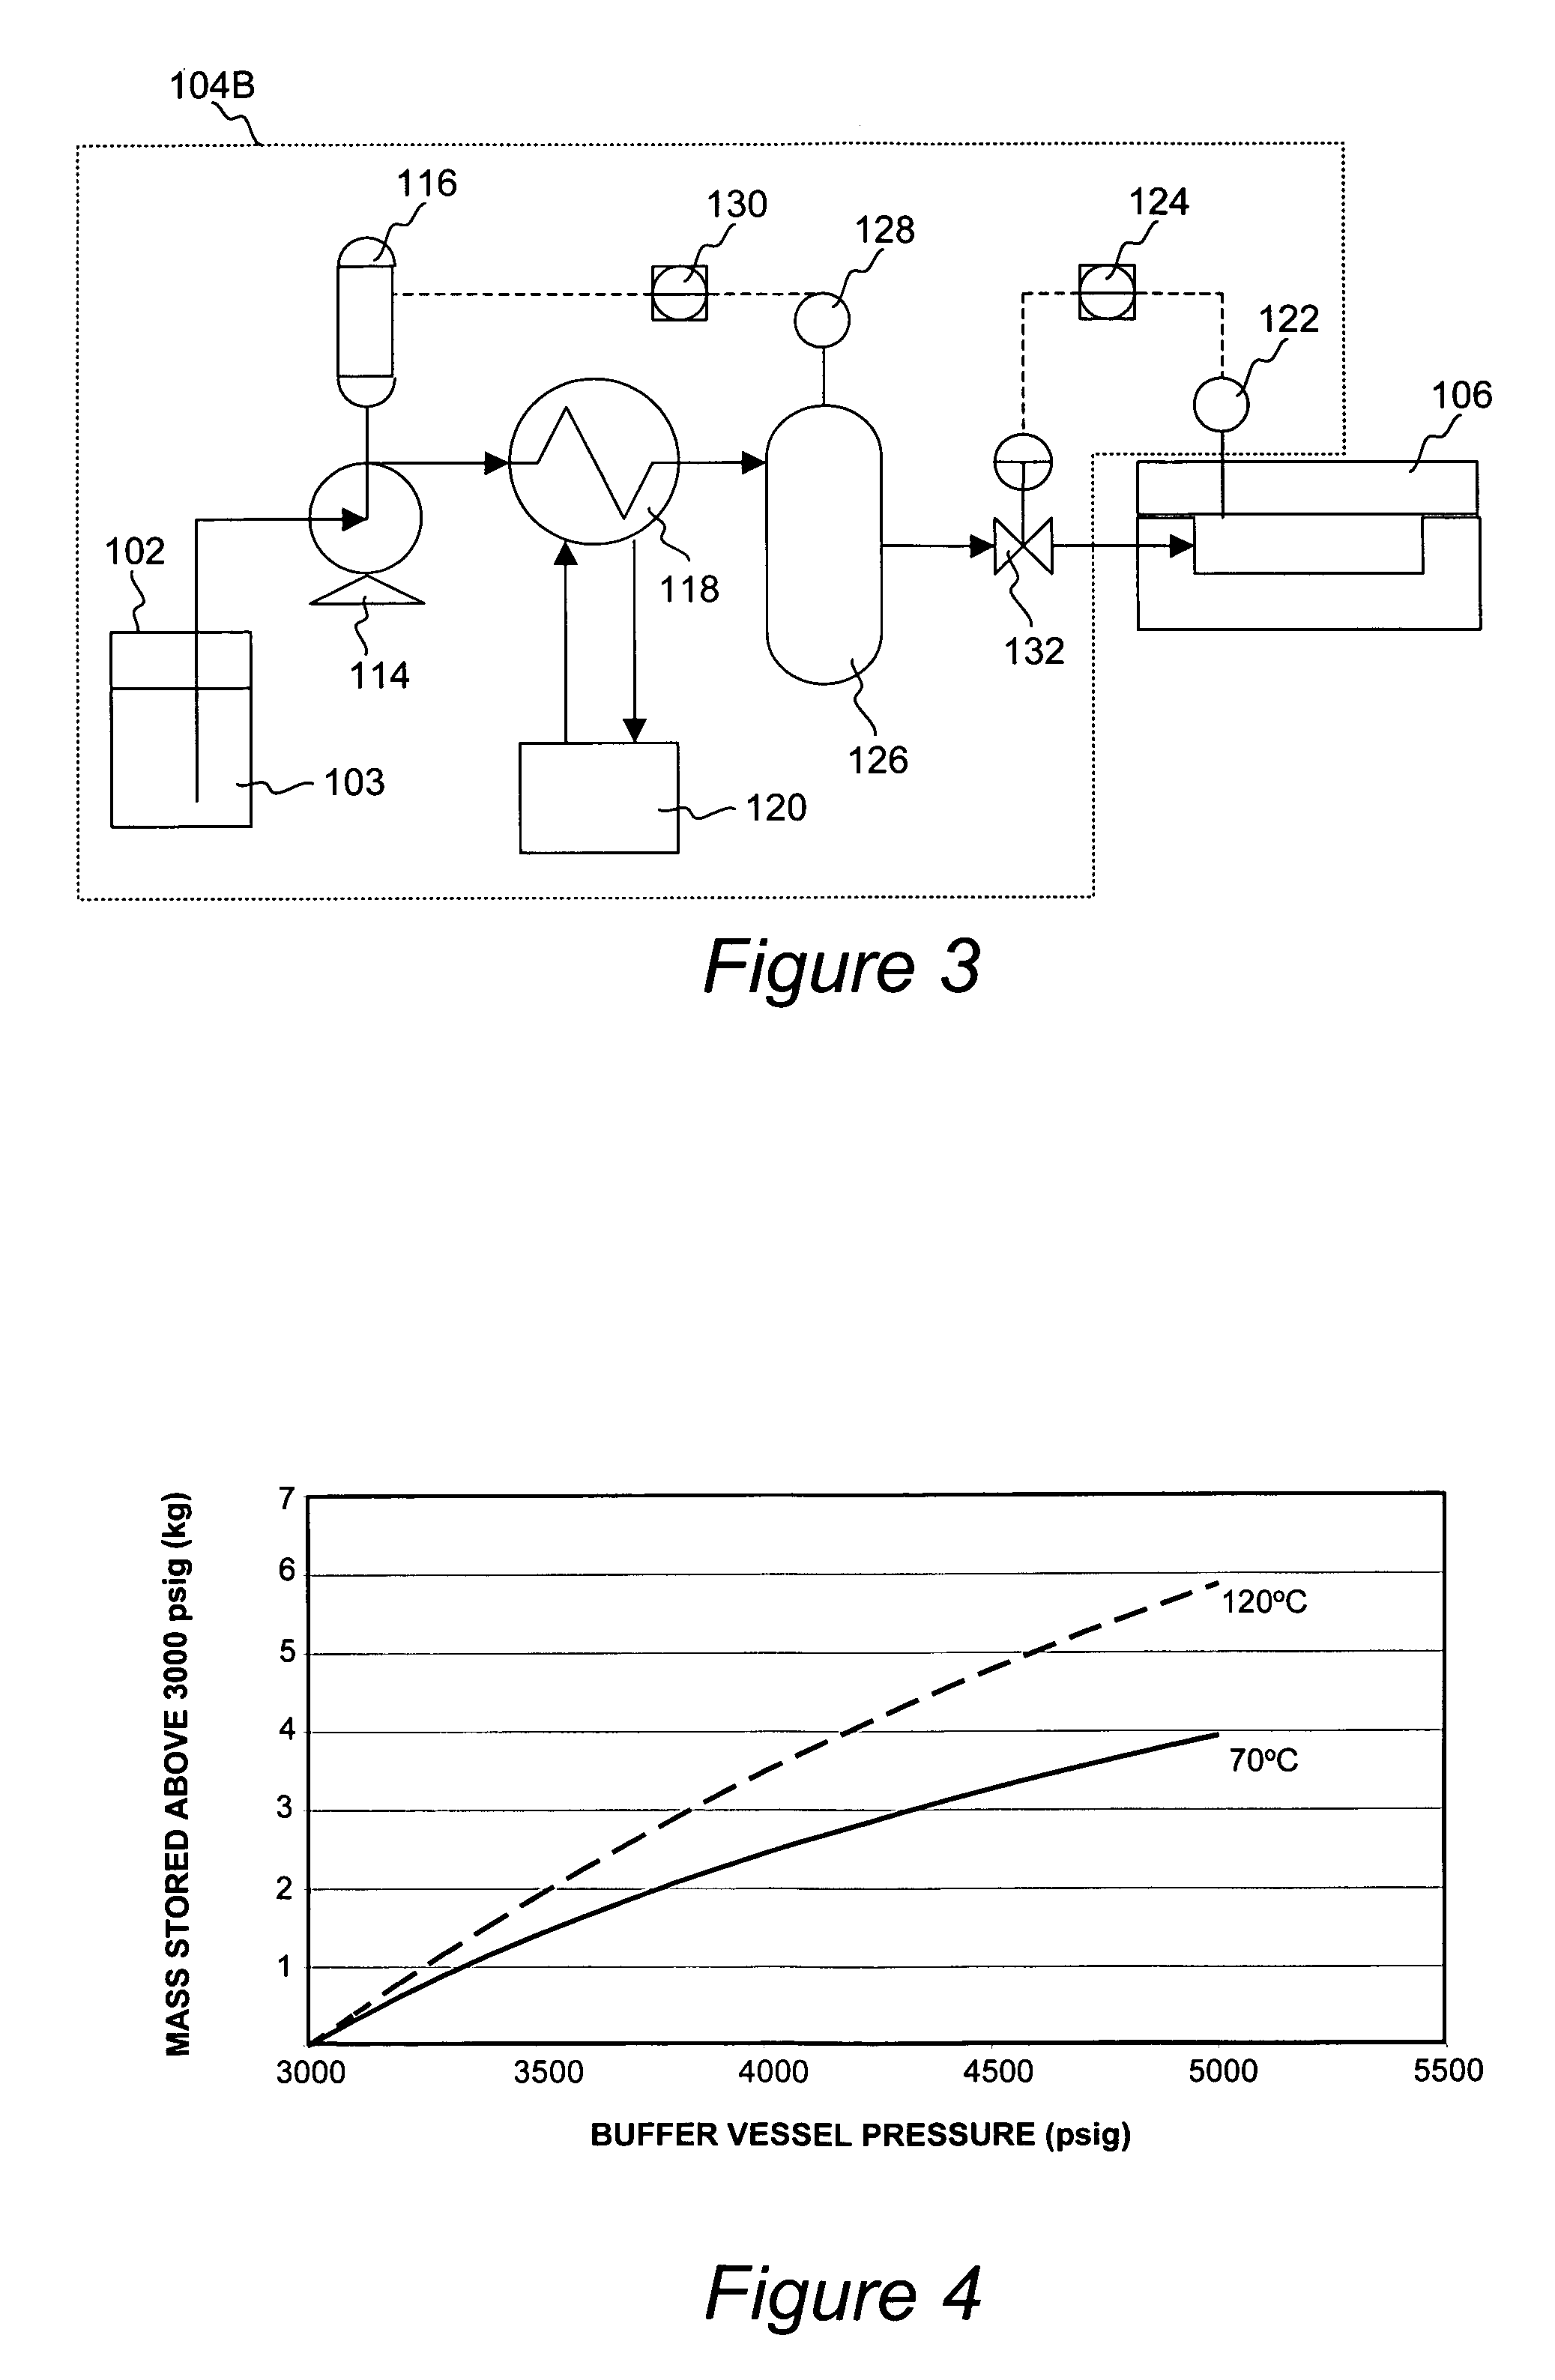 Apparatus and methods for processing semiconductor substrates using supercritical fluids